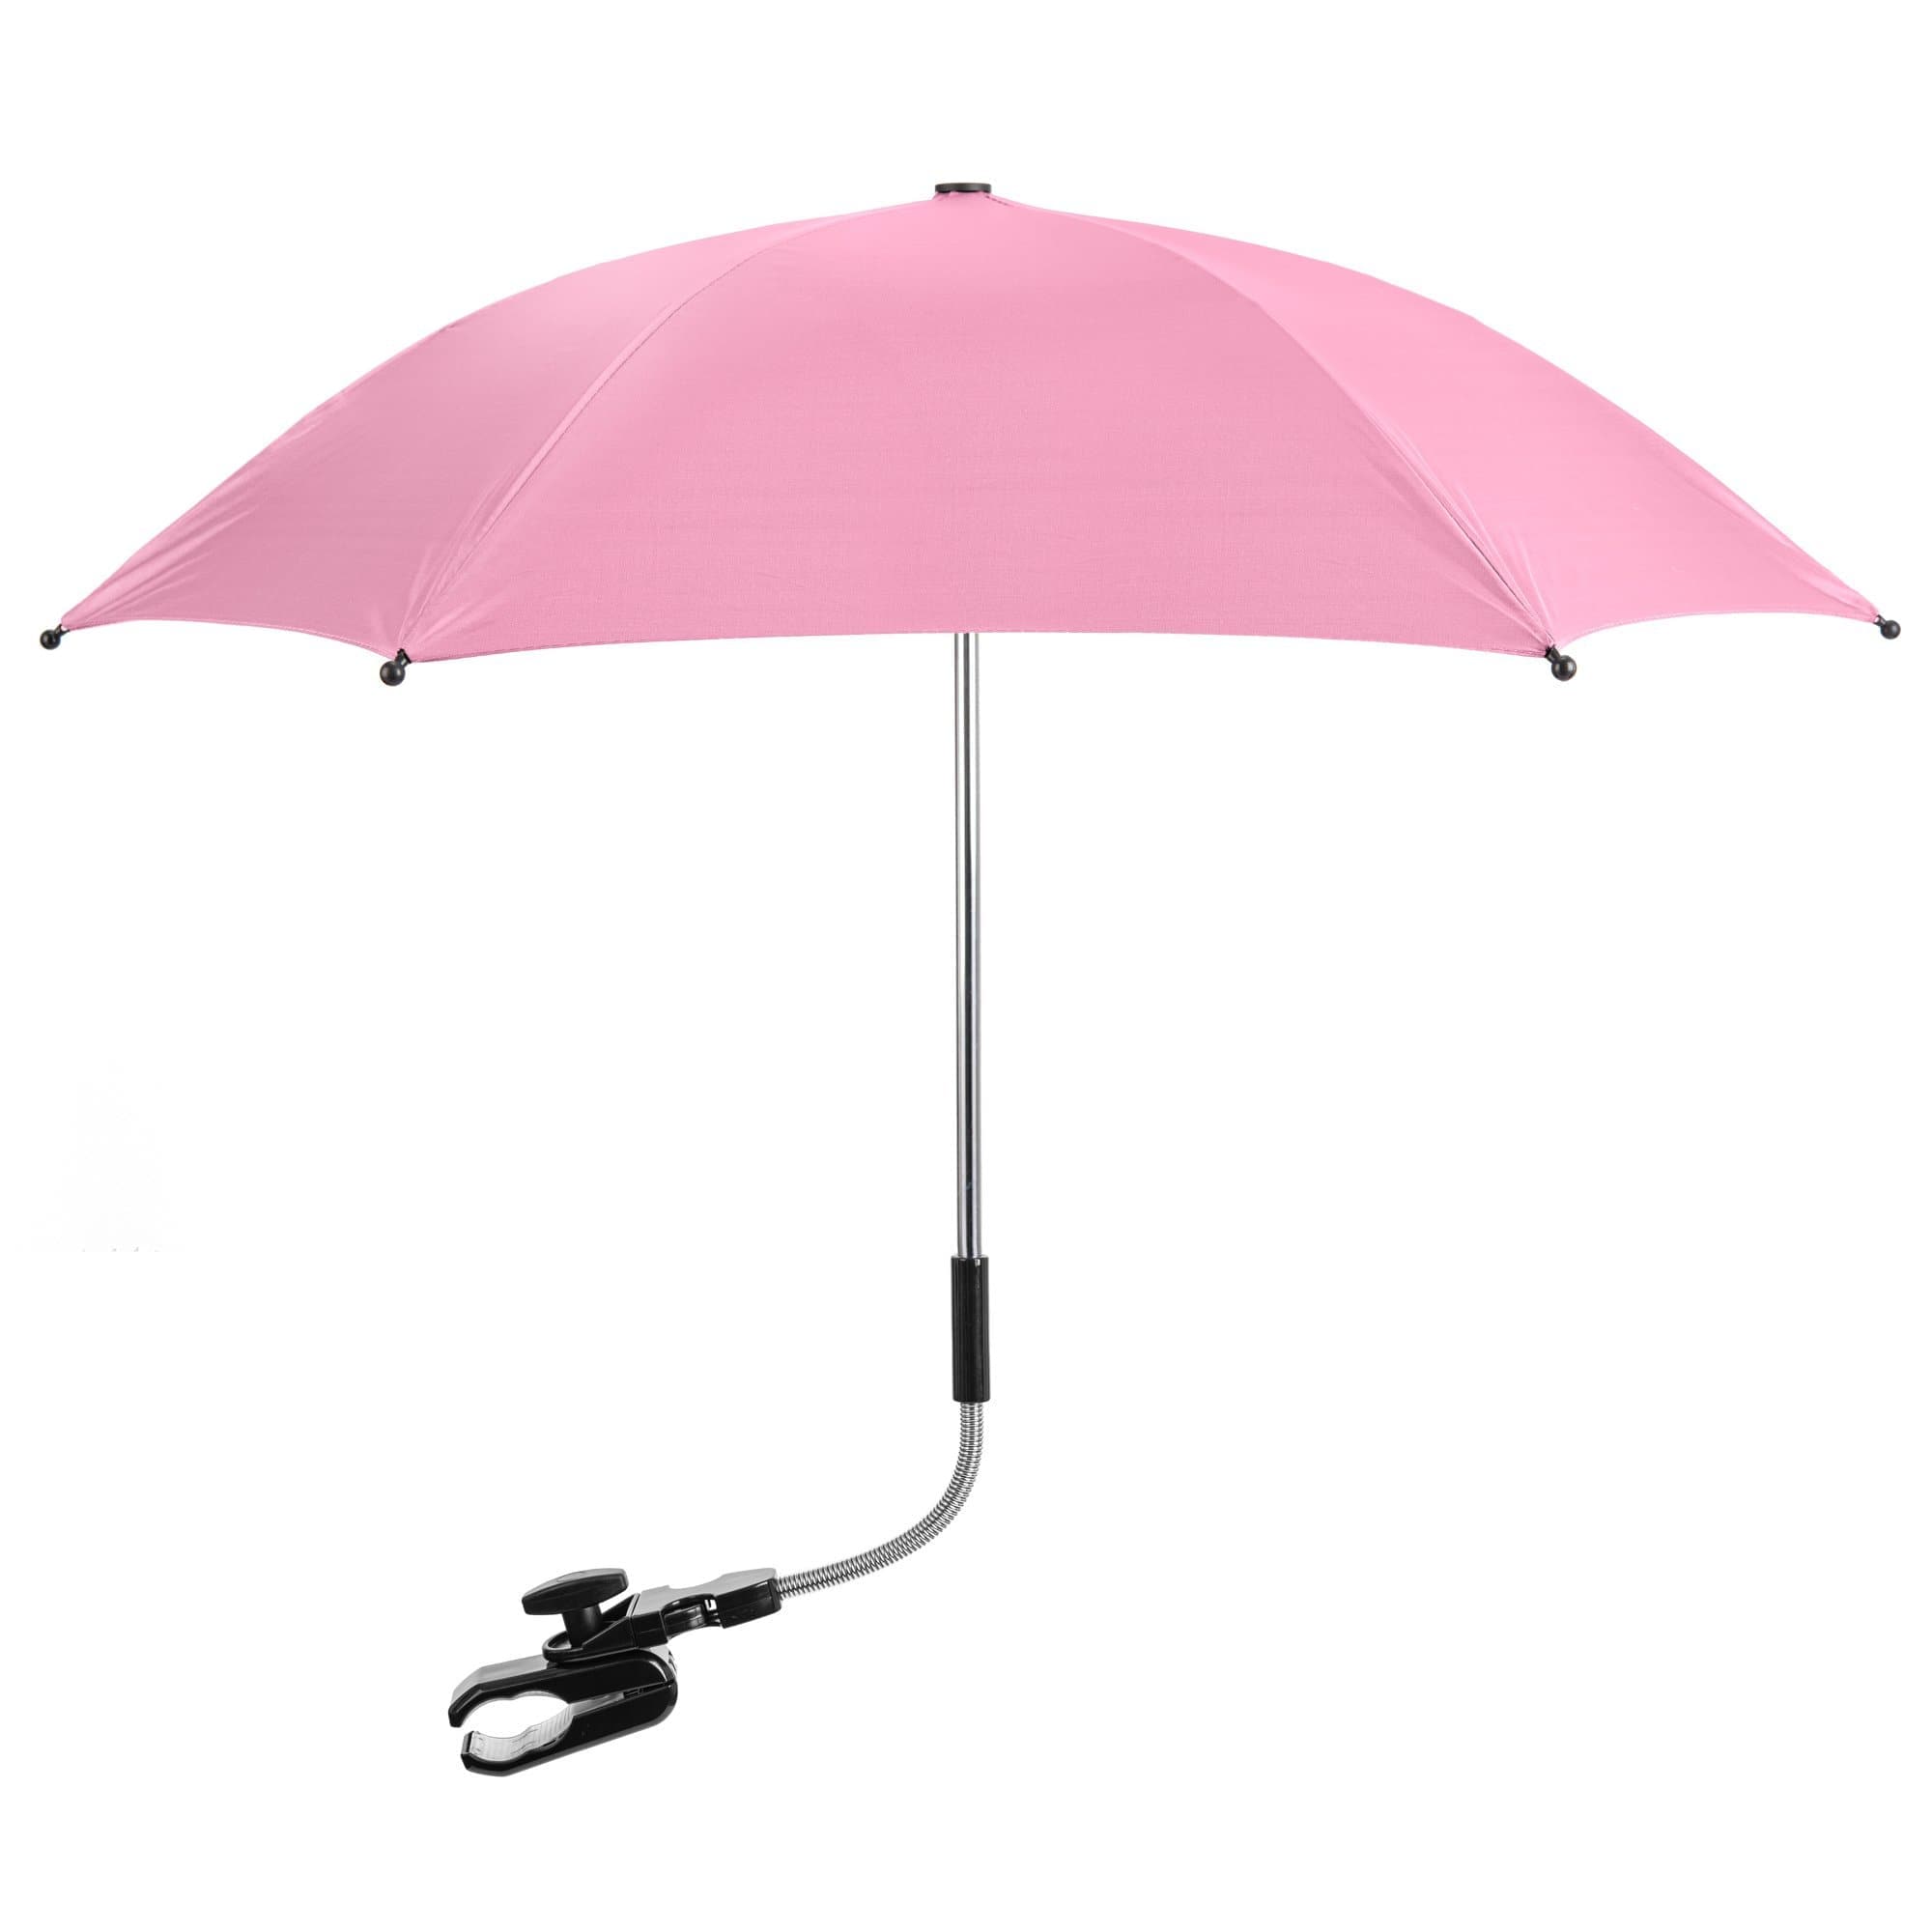 Baby Parasol Compatible With BabyDan - Fits All Models - Light Pink / Fits All Models | For Your Little One